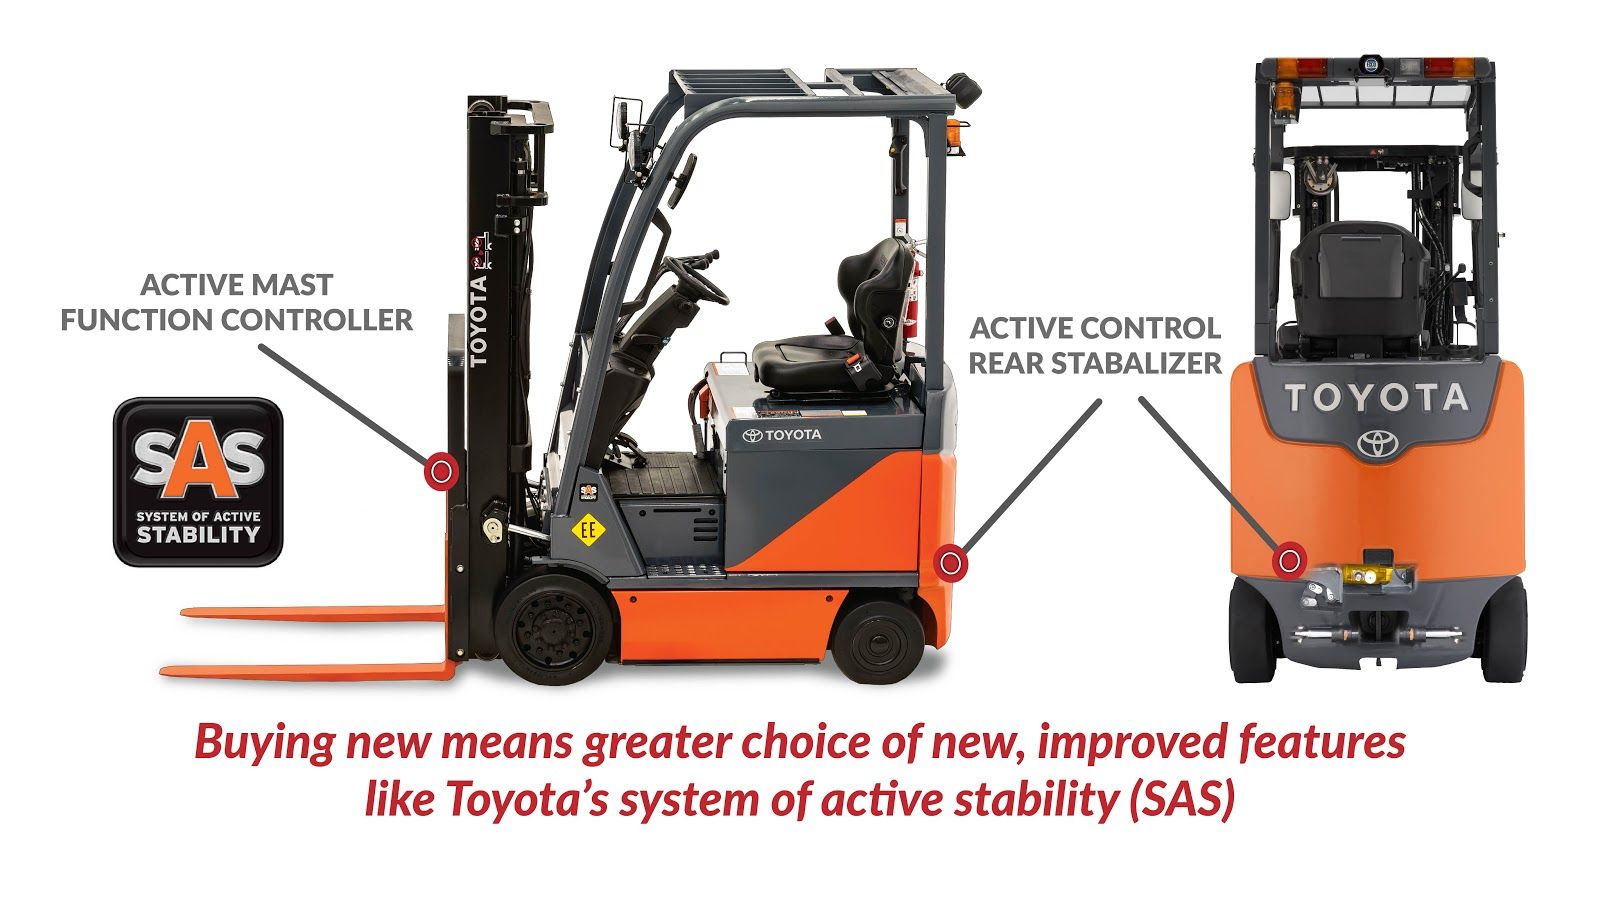 New Used Forklift Prices How To Choose The Perfect Lift Truck For Your Budget 2020 Update